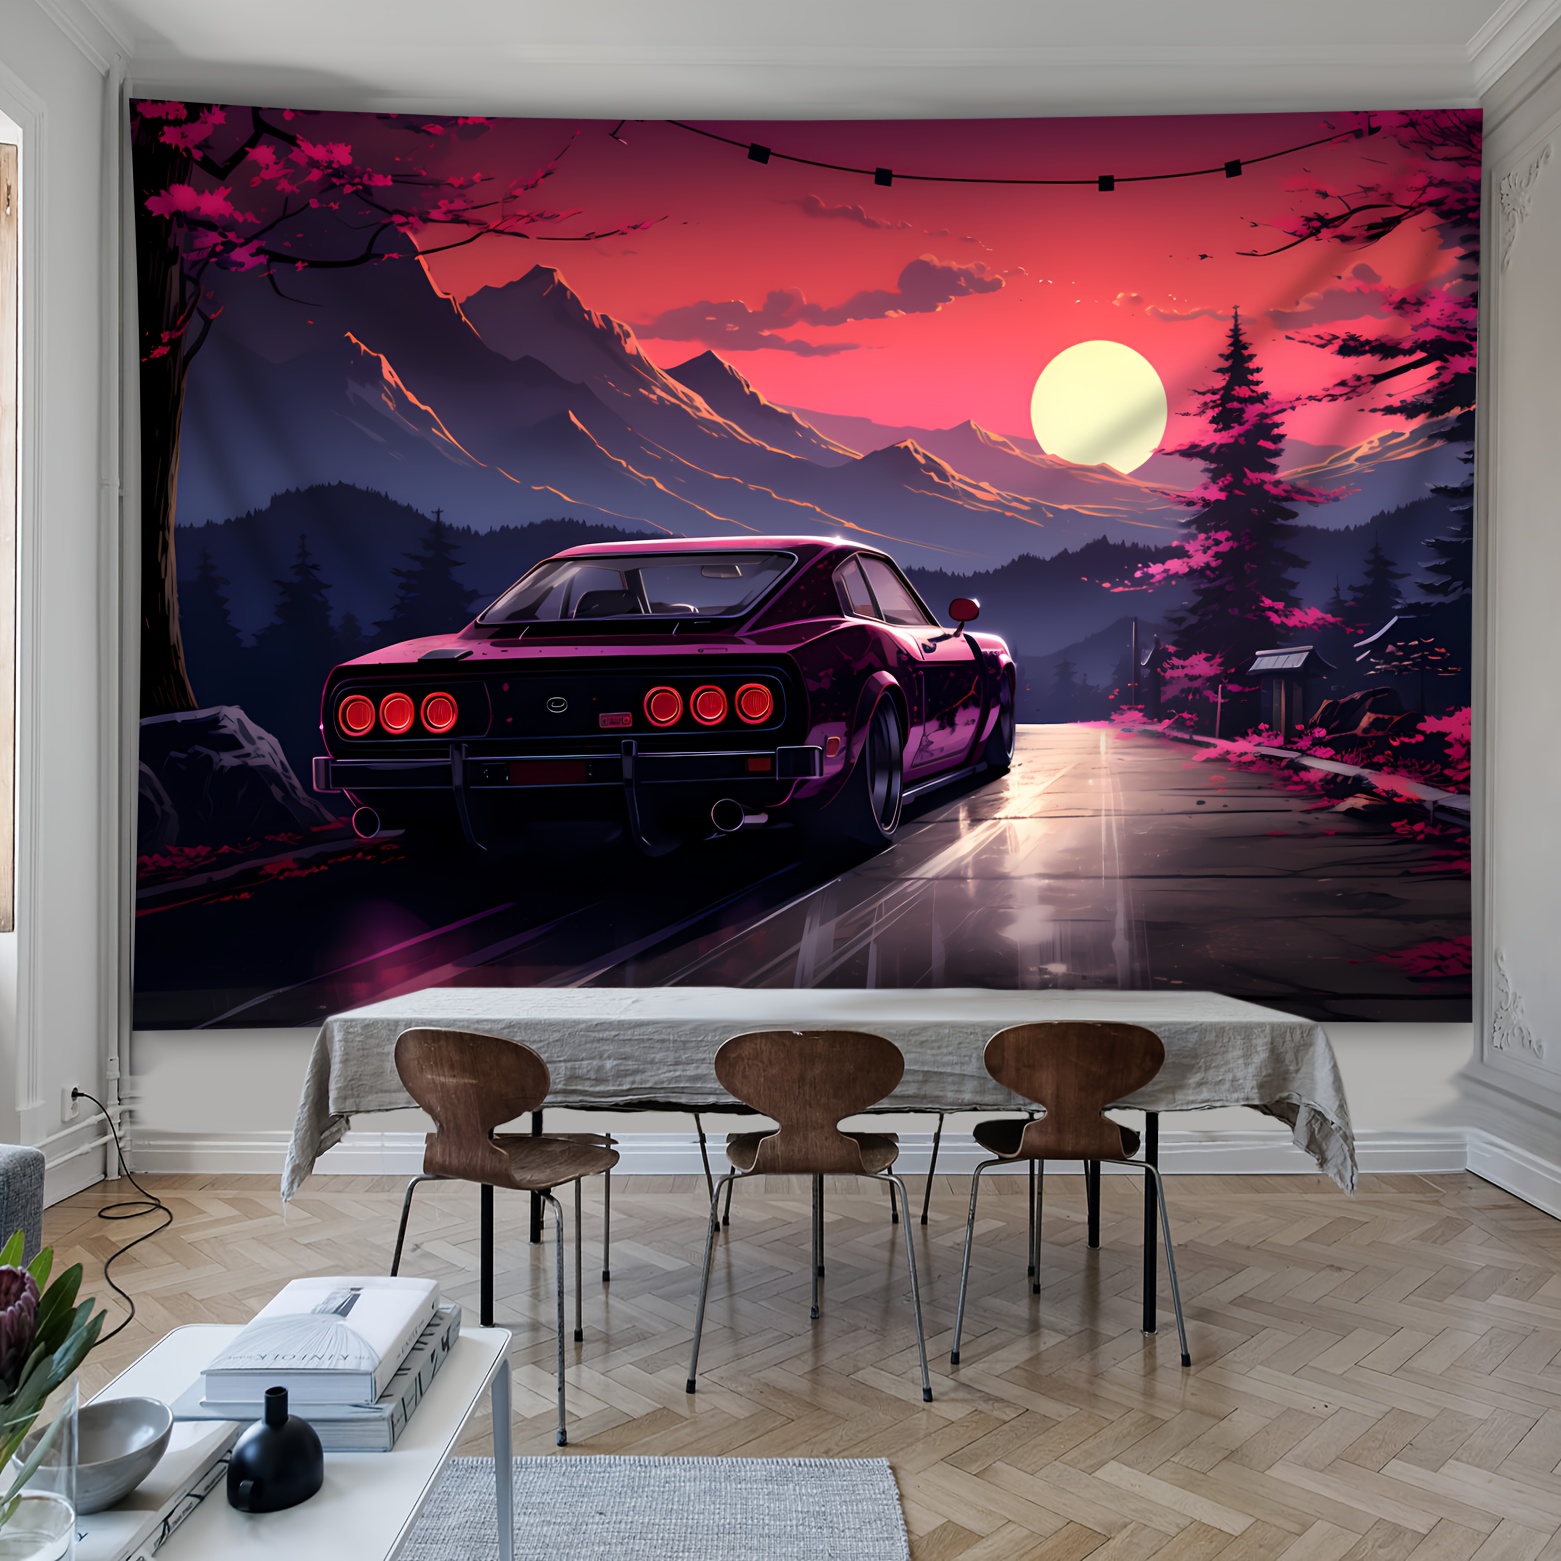 

Sunset Drive Car Tapestry - Large Woven Polyester Wall Hanging, Vibrant Vehicle-themed Art Decor For Living Room, Dorm, No-install Home Accent, Indoor Use, Scenic Mountain Road Backdrop